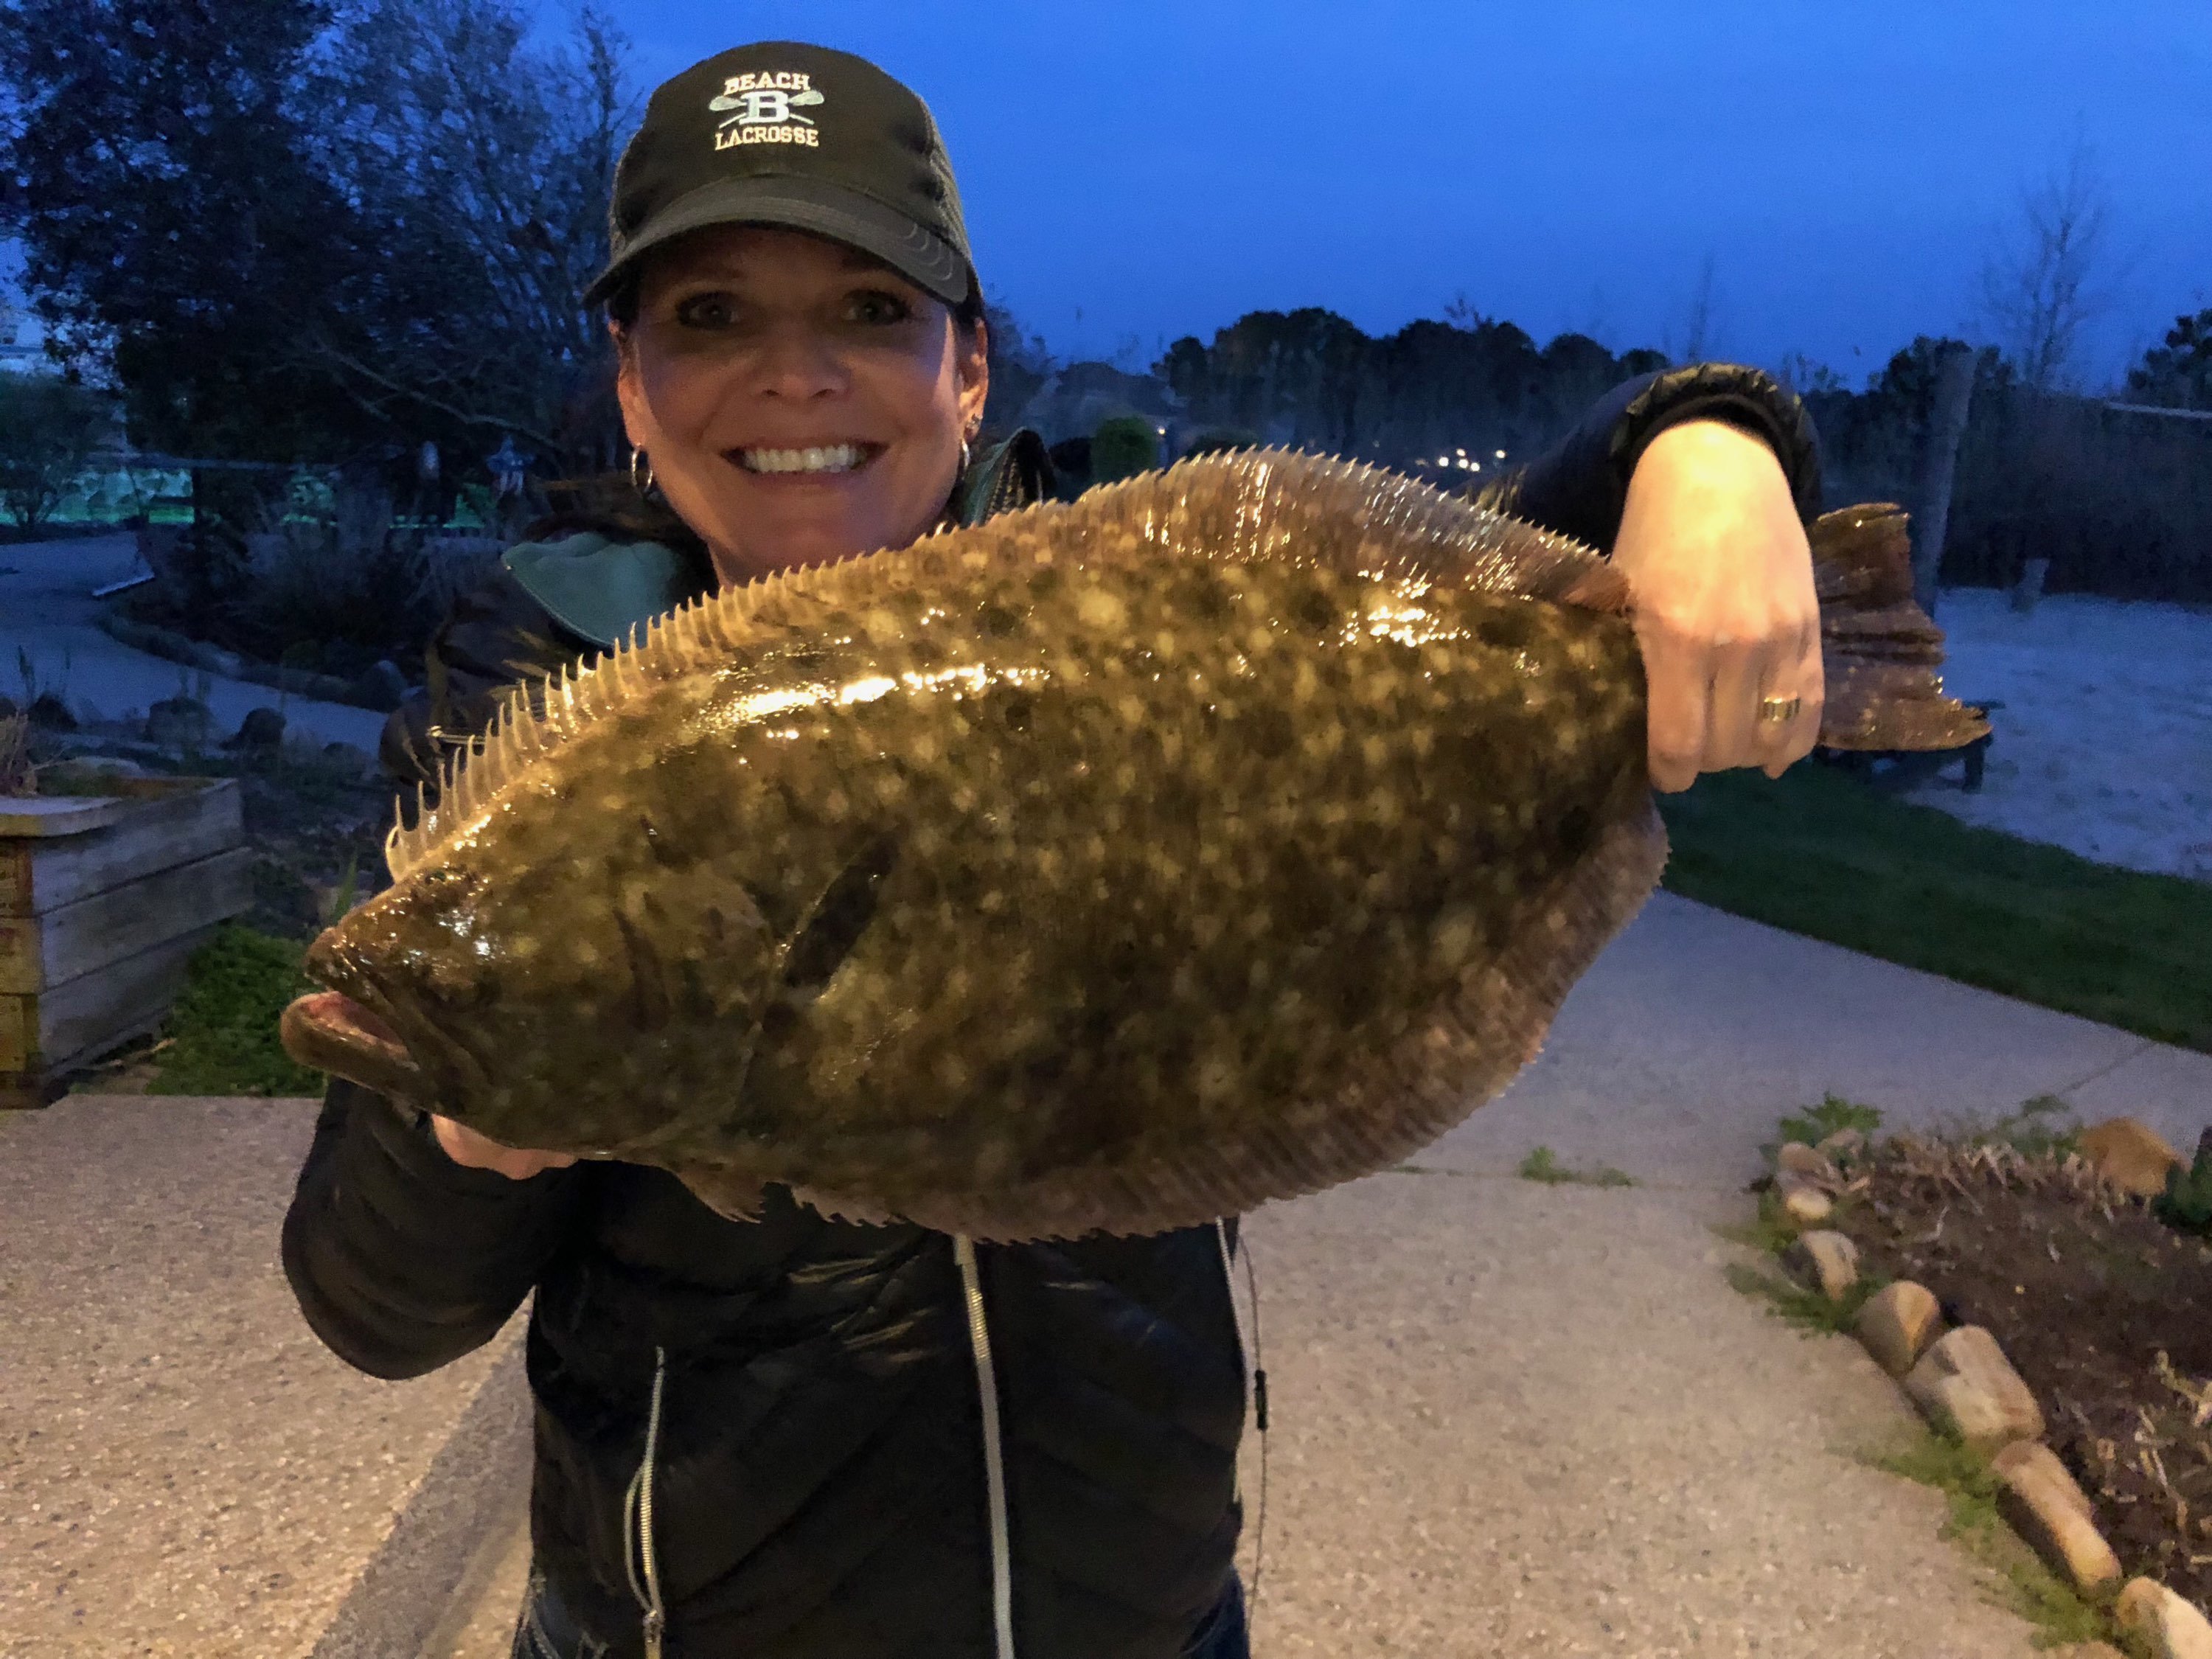 Fish at The Oceanic Pier and the Biggest Flounder of the Season